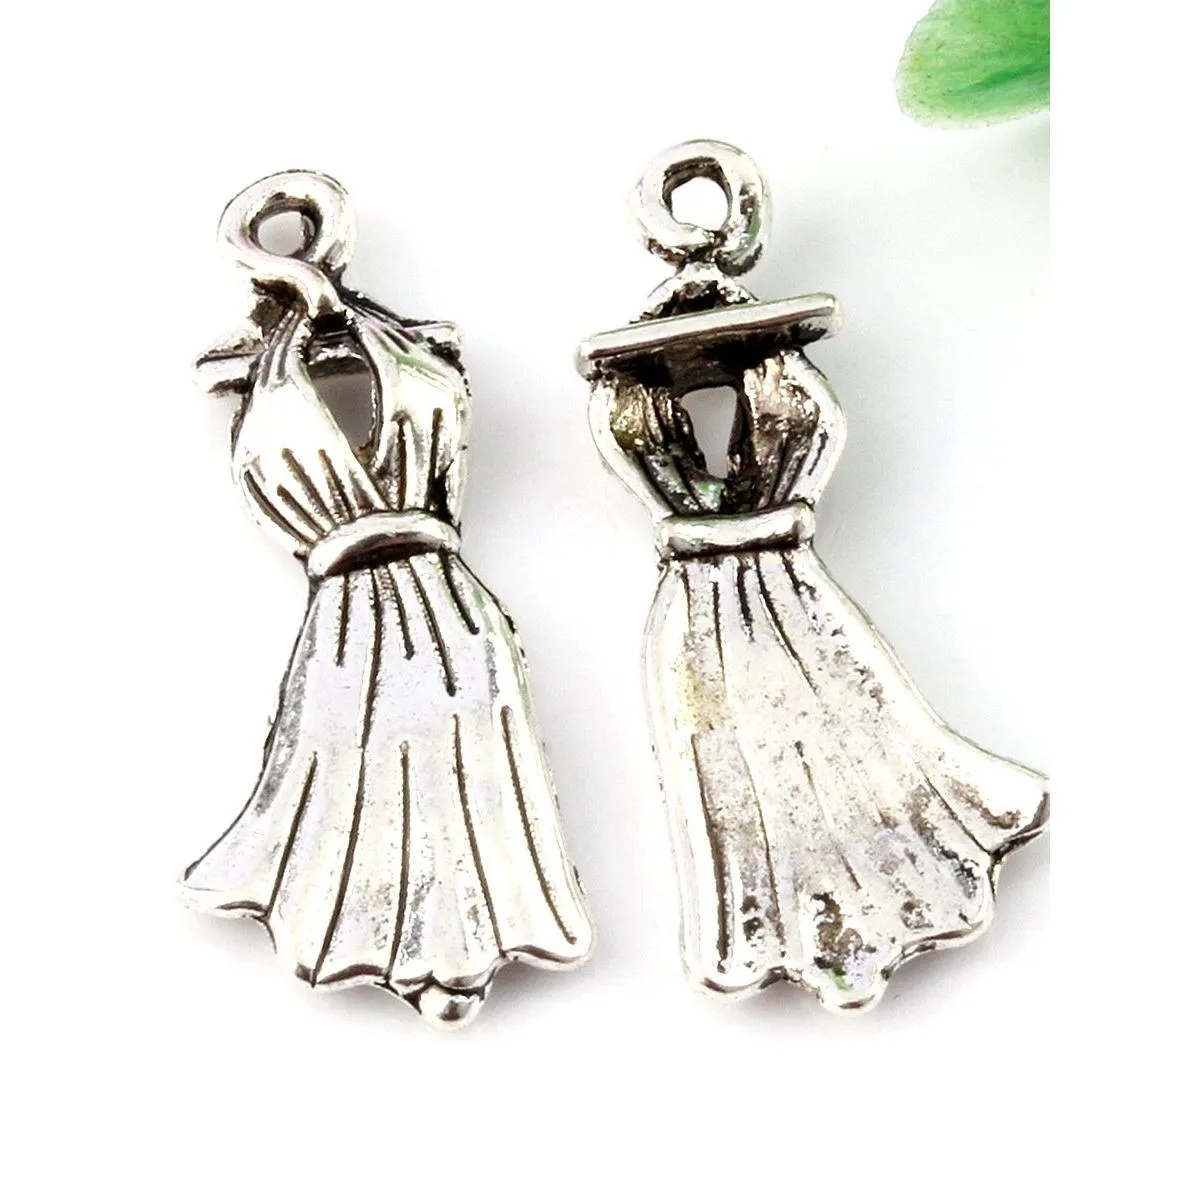 Charms 250Pcs Antique Sier Alloy Dress Charms Pendants For Jewelry Making Findings 10.5X26Mm Jewelry Jewelry Findings Components Dh92R